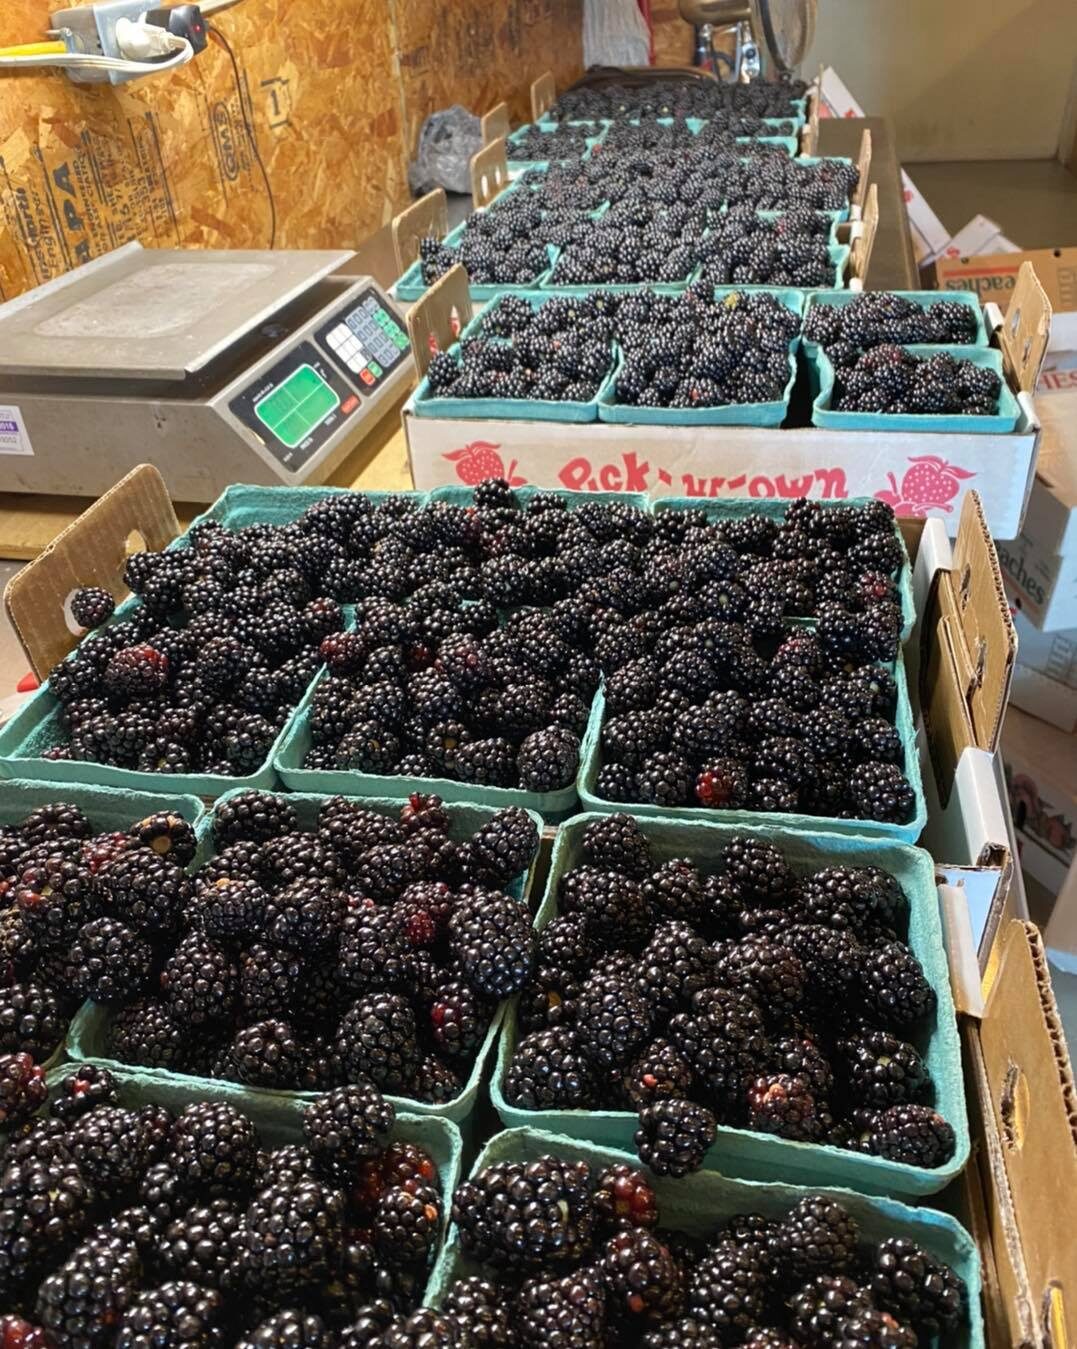 Blackberries already picked and ready for sale at Backwoods Berry Farm along the Lewis and Clark Historic Trail